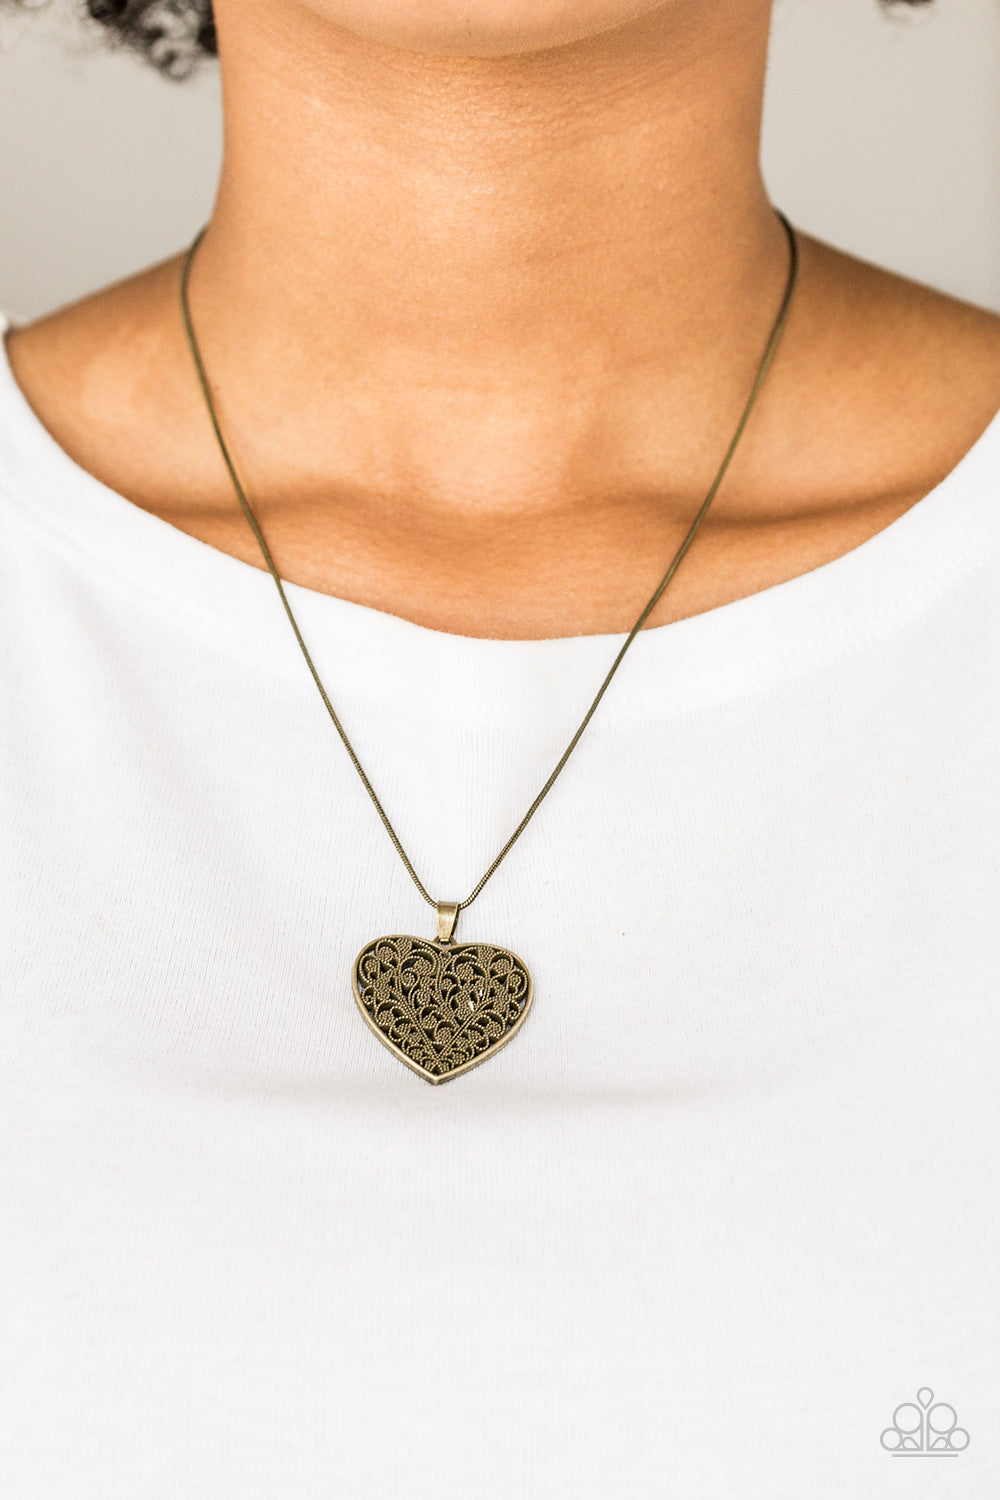 Look Into Your Heart - Brass Necklace